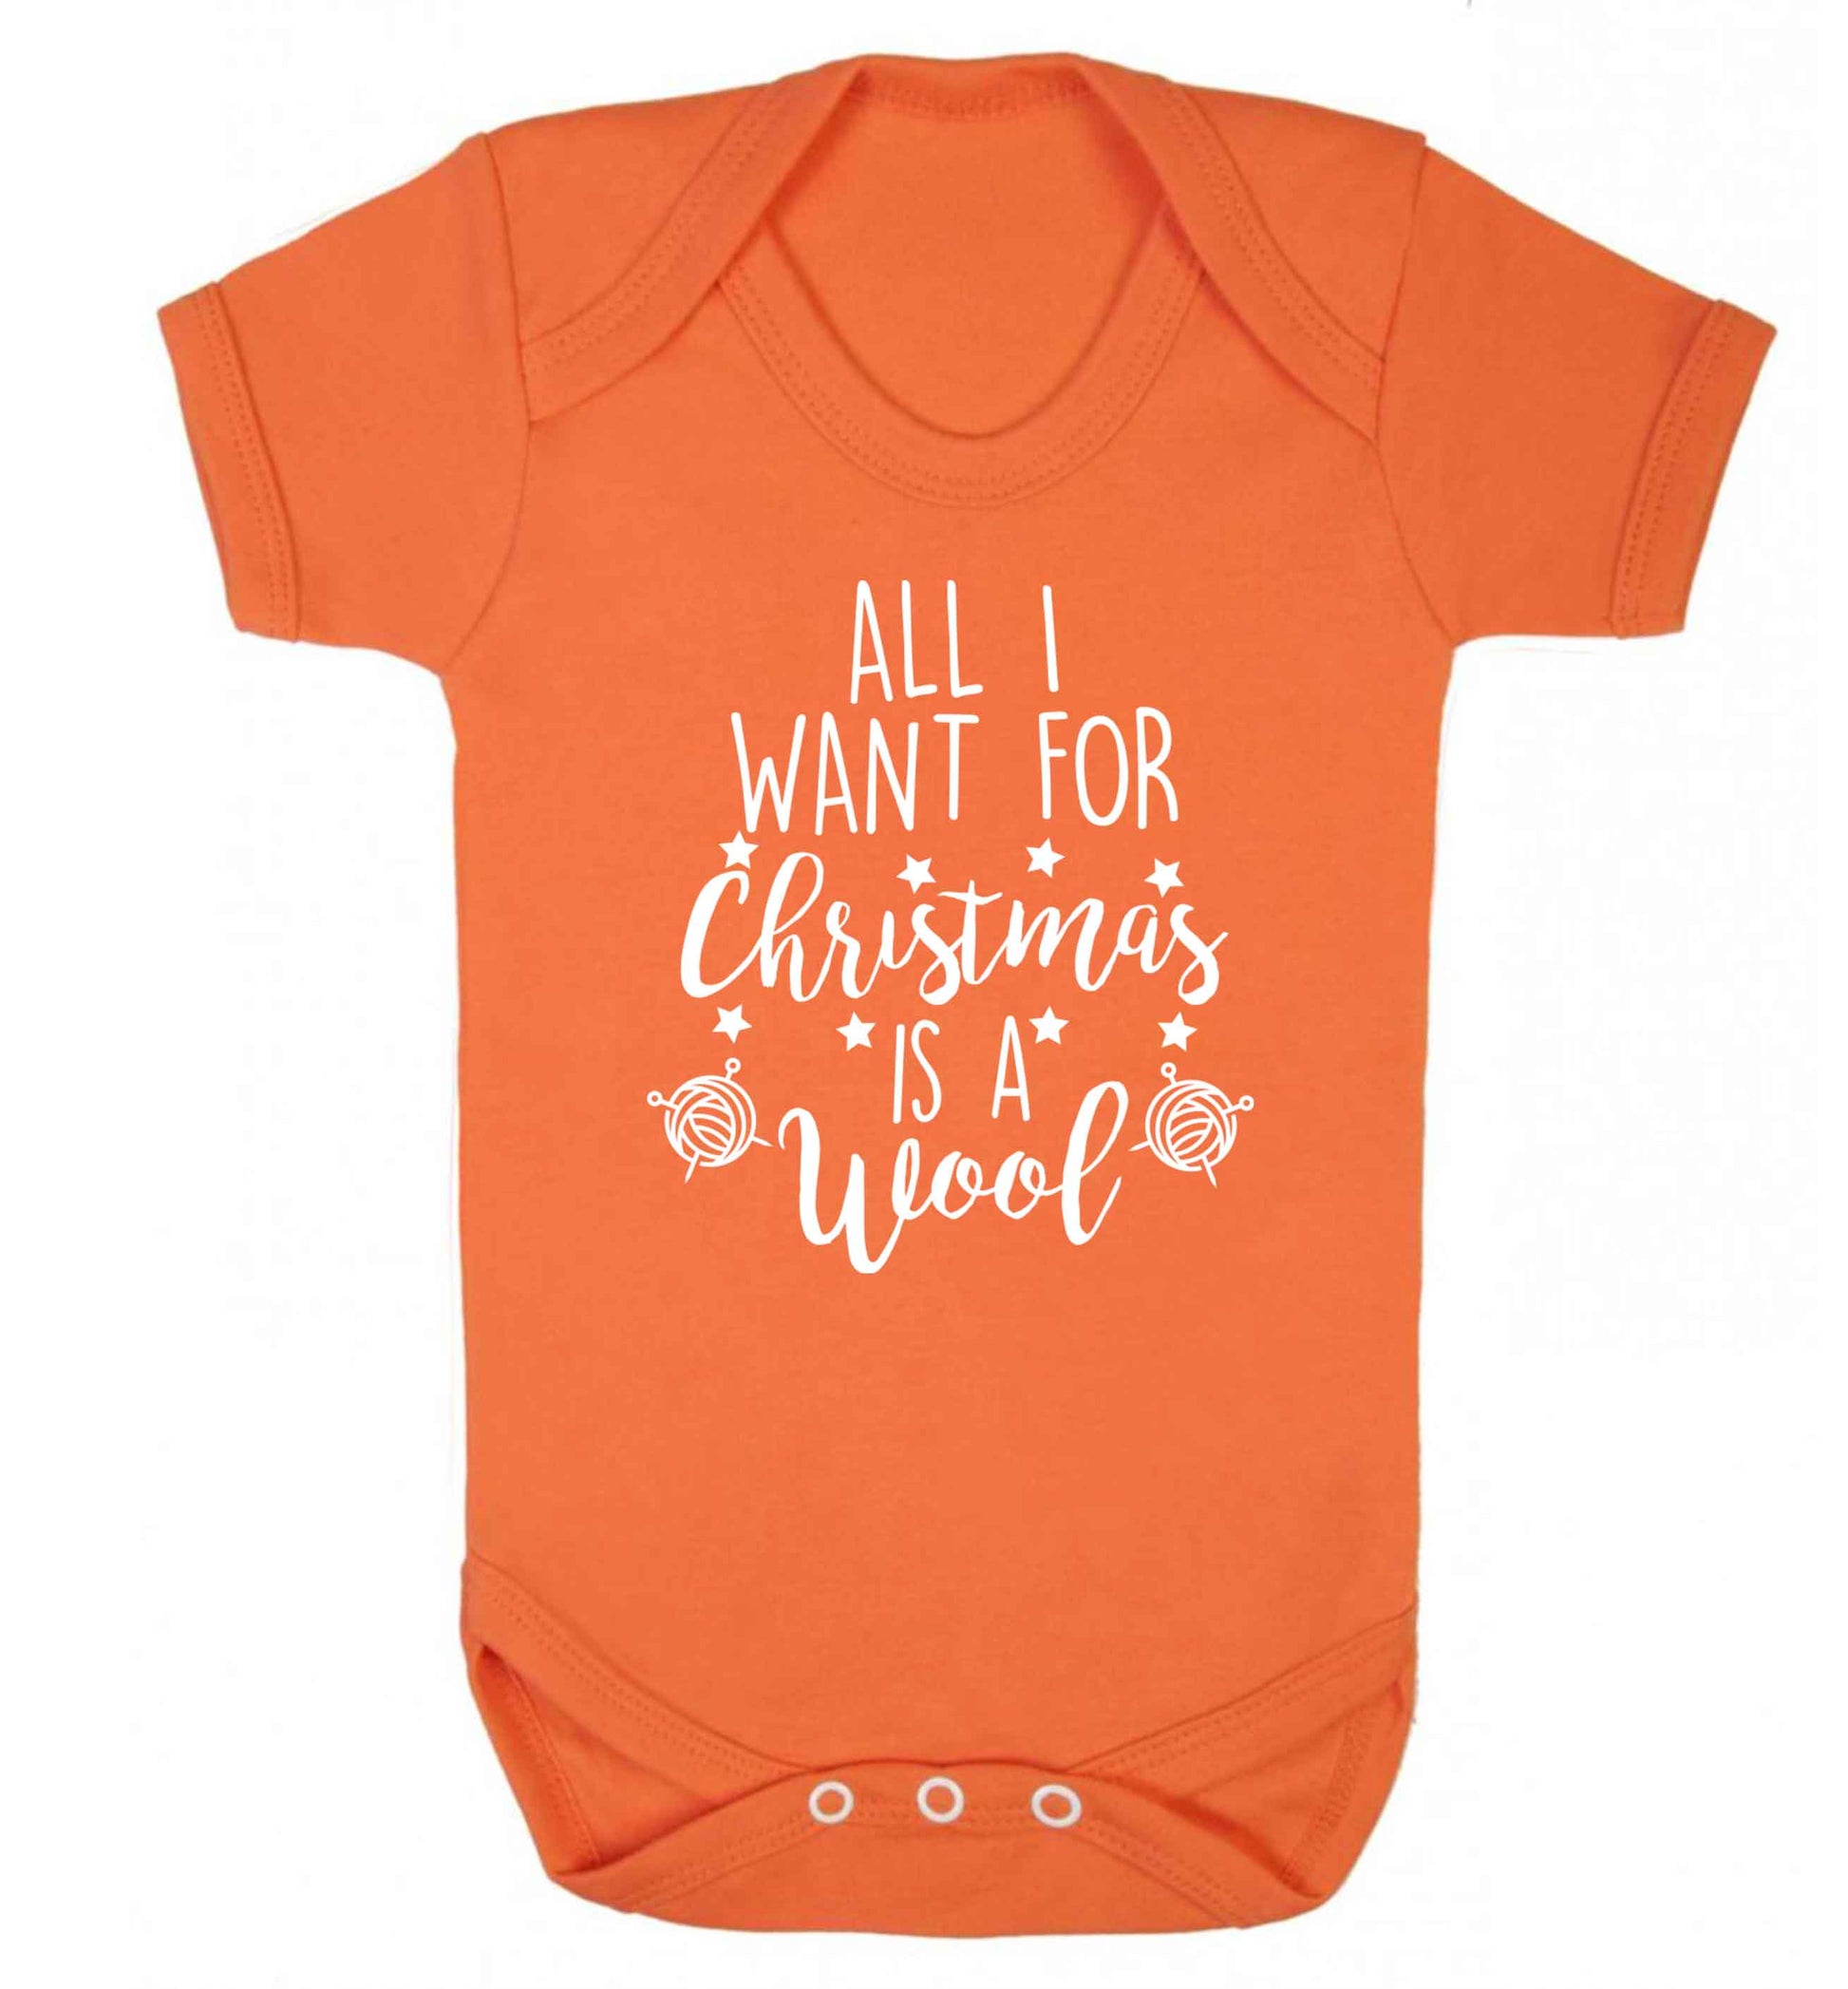 All I want for Christmas is wool! Baby Vest orange 18-24 months